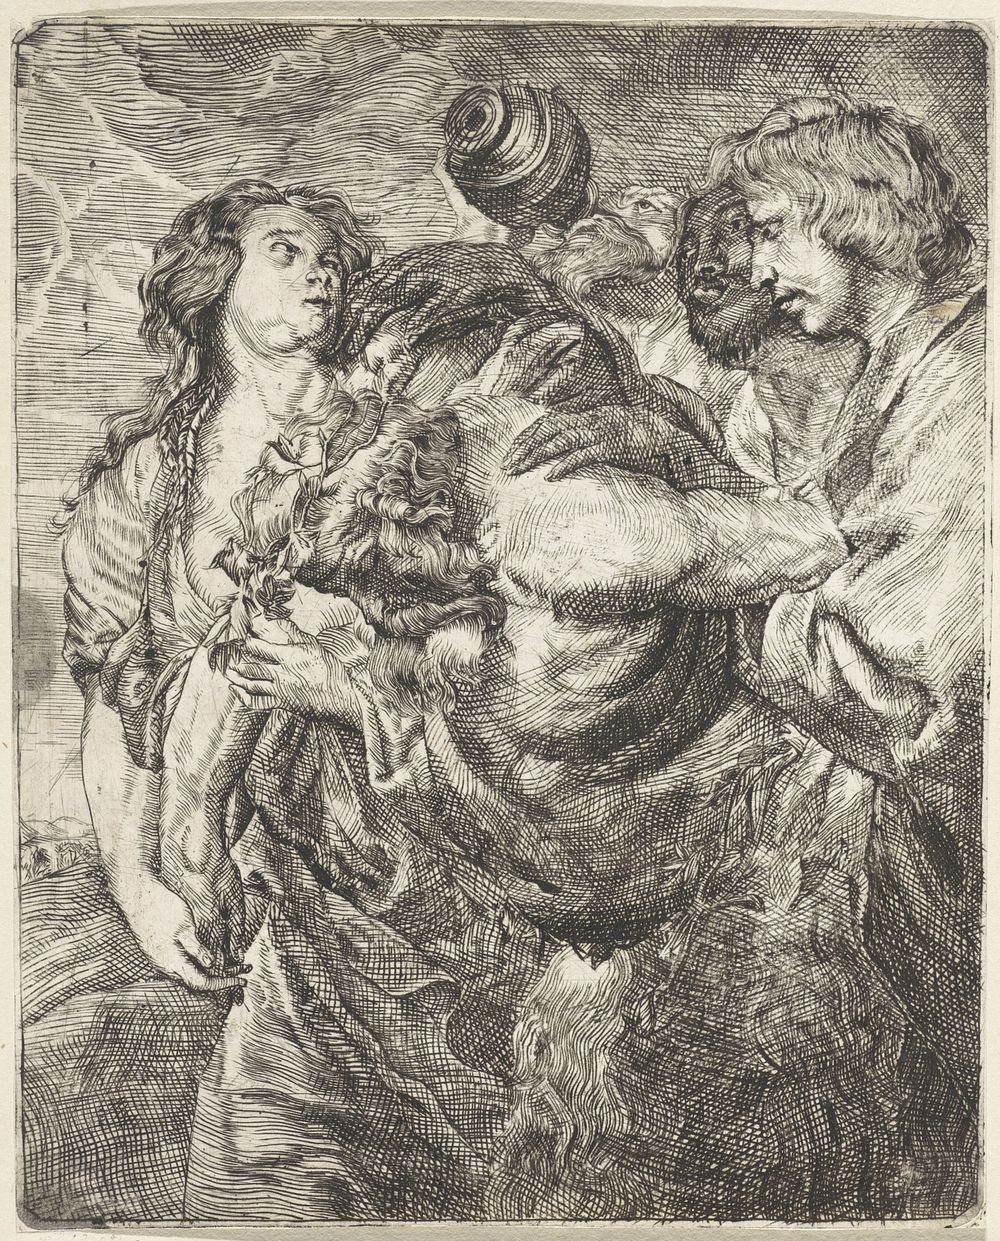 Dronken Silenus (1615 - 1691) by anonymous, Schelte Adamsz Bolswert and Anthony van Dyck